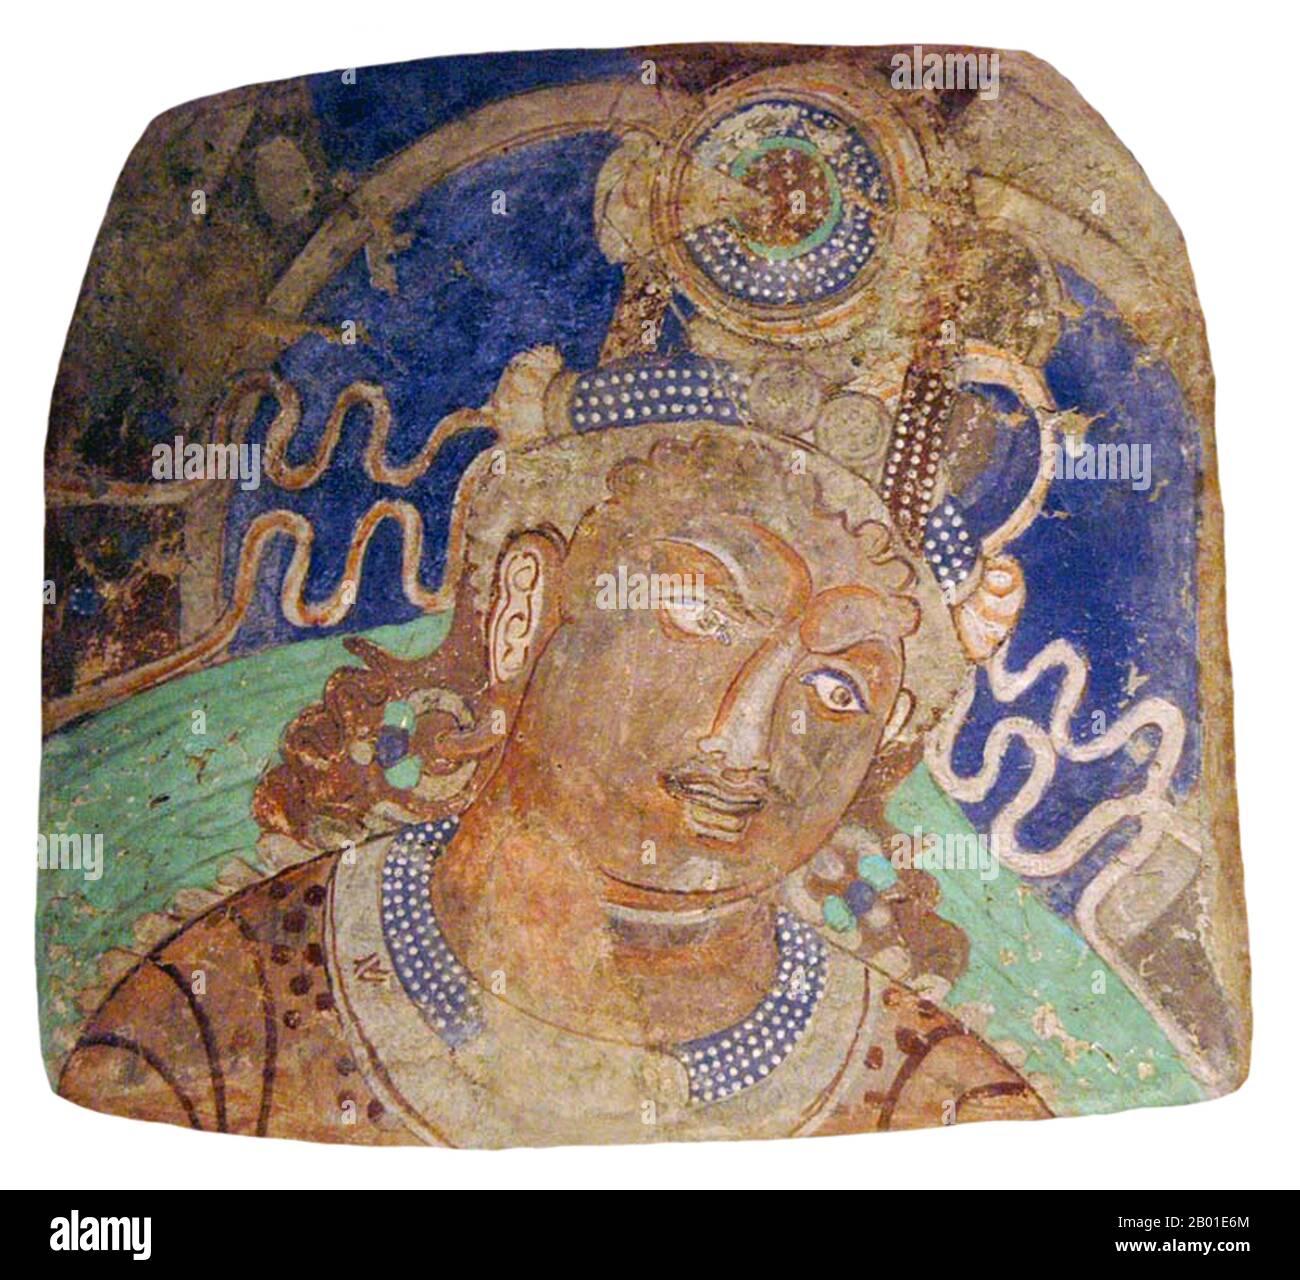 China: Portrait of a Malla prince, Kizil Thousand Buddha Caves, Xinjiang, c. 417-435 CE.  The Kizil Caves (also romanized Qizil Caves, spelling variant Qyzyl; Uyghur: Qizil Ming Öy; Chinese: 克孜尔千佛洞; pinyin: Kèzīěr Qiānfú Dòng; literally 'Kizil Cave of a Thousand Buddhas') are a set of 236 Buddhist rock-cut caves located near Kizil Township (克孜尔乡) in Baicheng County, Xinjiang, China. The site is located on the northern bank of the Muzat River 75 kilometres (by road) northwest of Kucha (Kuqa). This area was a commercial hub of the Silk Road. Stock Photo